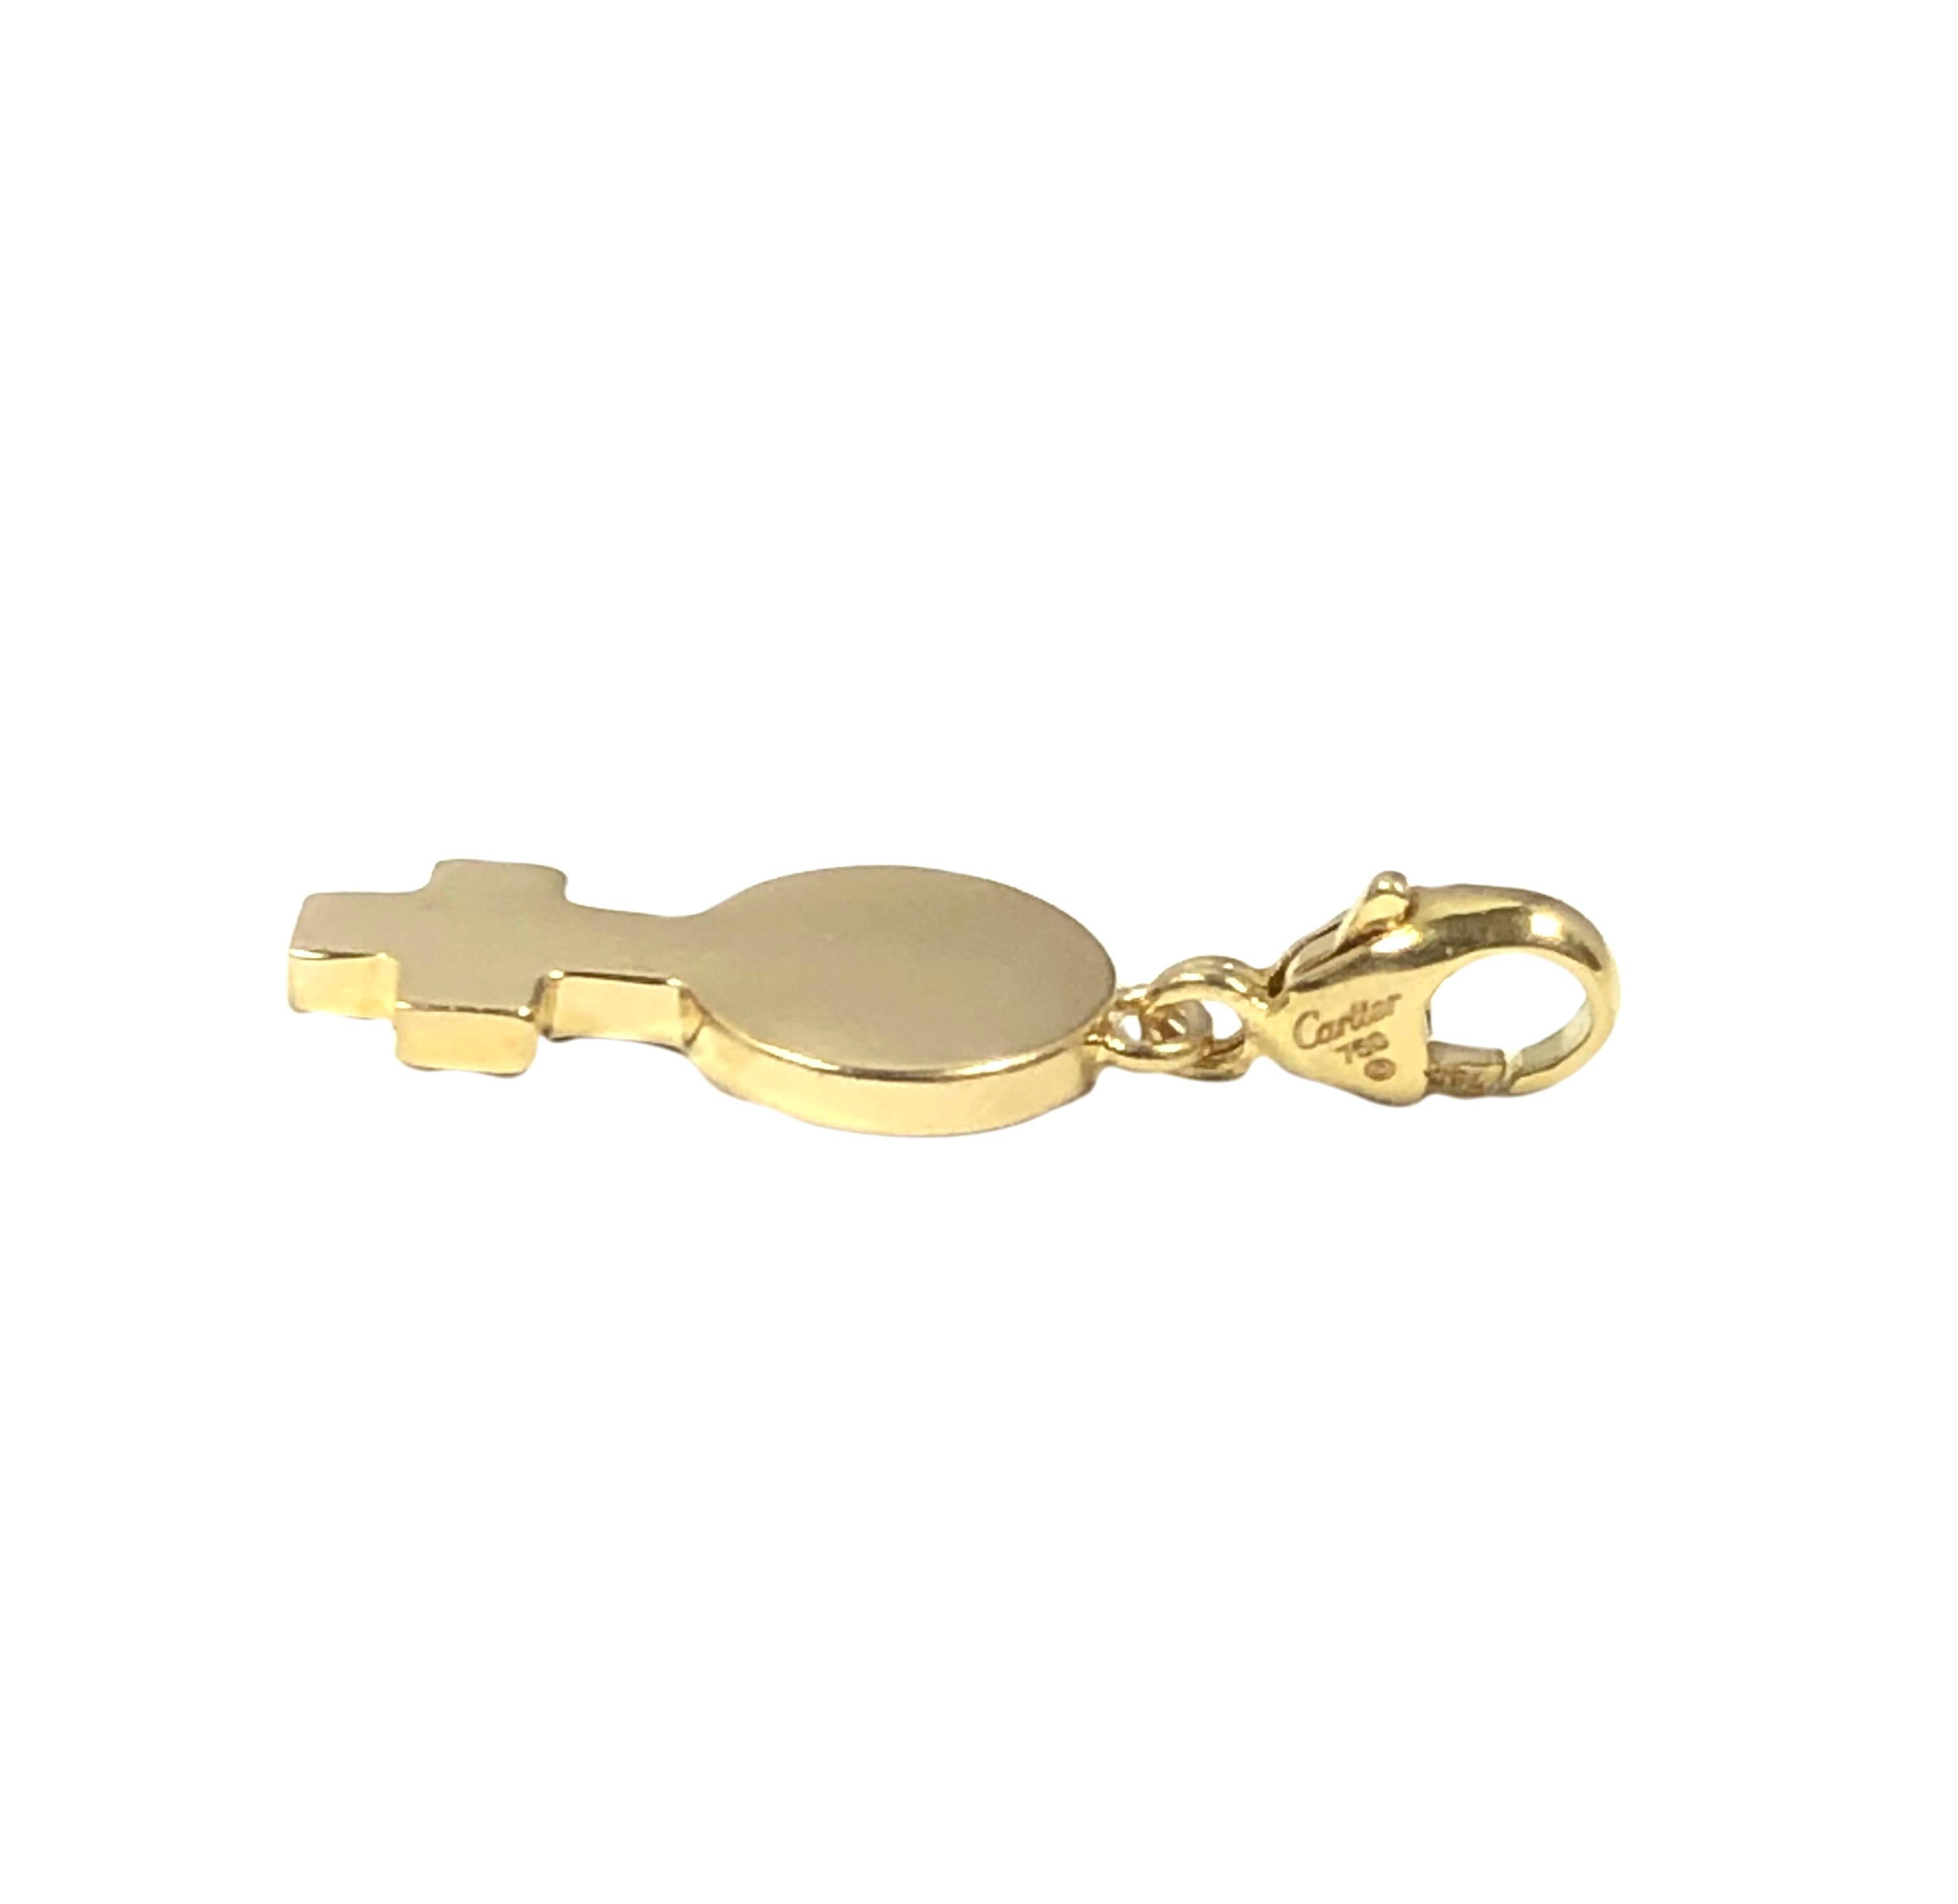 Circa 2000 Cartier 18k Yellow Gold Female Sex Symbol Charm, measuring 5/8 x 5/16 inch and weighing 2.4 Grams. Having a lobster claw lock for easy on and off to be worn on a charm bracelet or as a necklace pendant. 